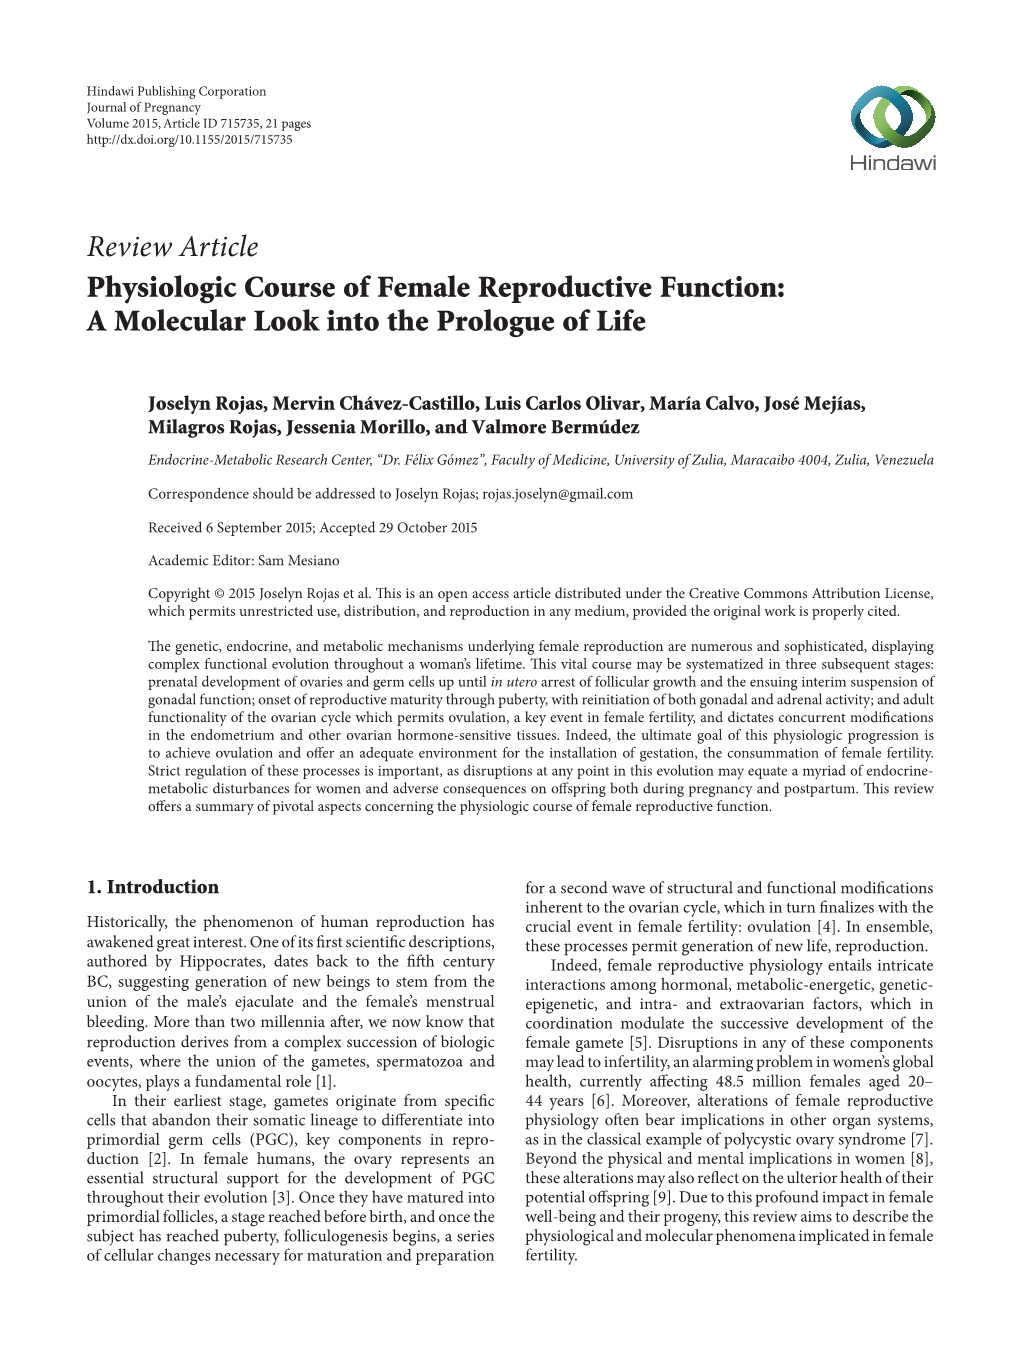 Review Article Physiologic Course of Female Reproductive Function: a Molecular Look Into the Prologue of Life